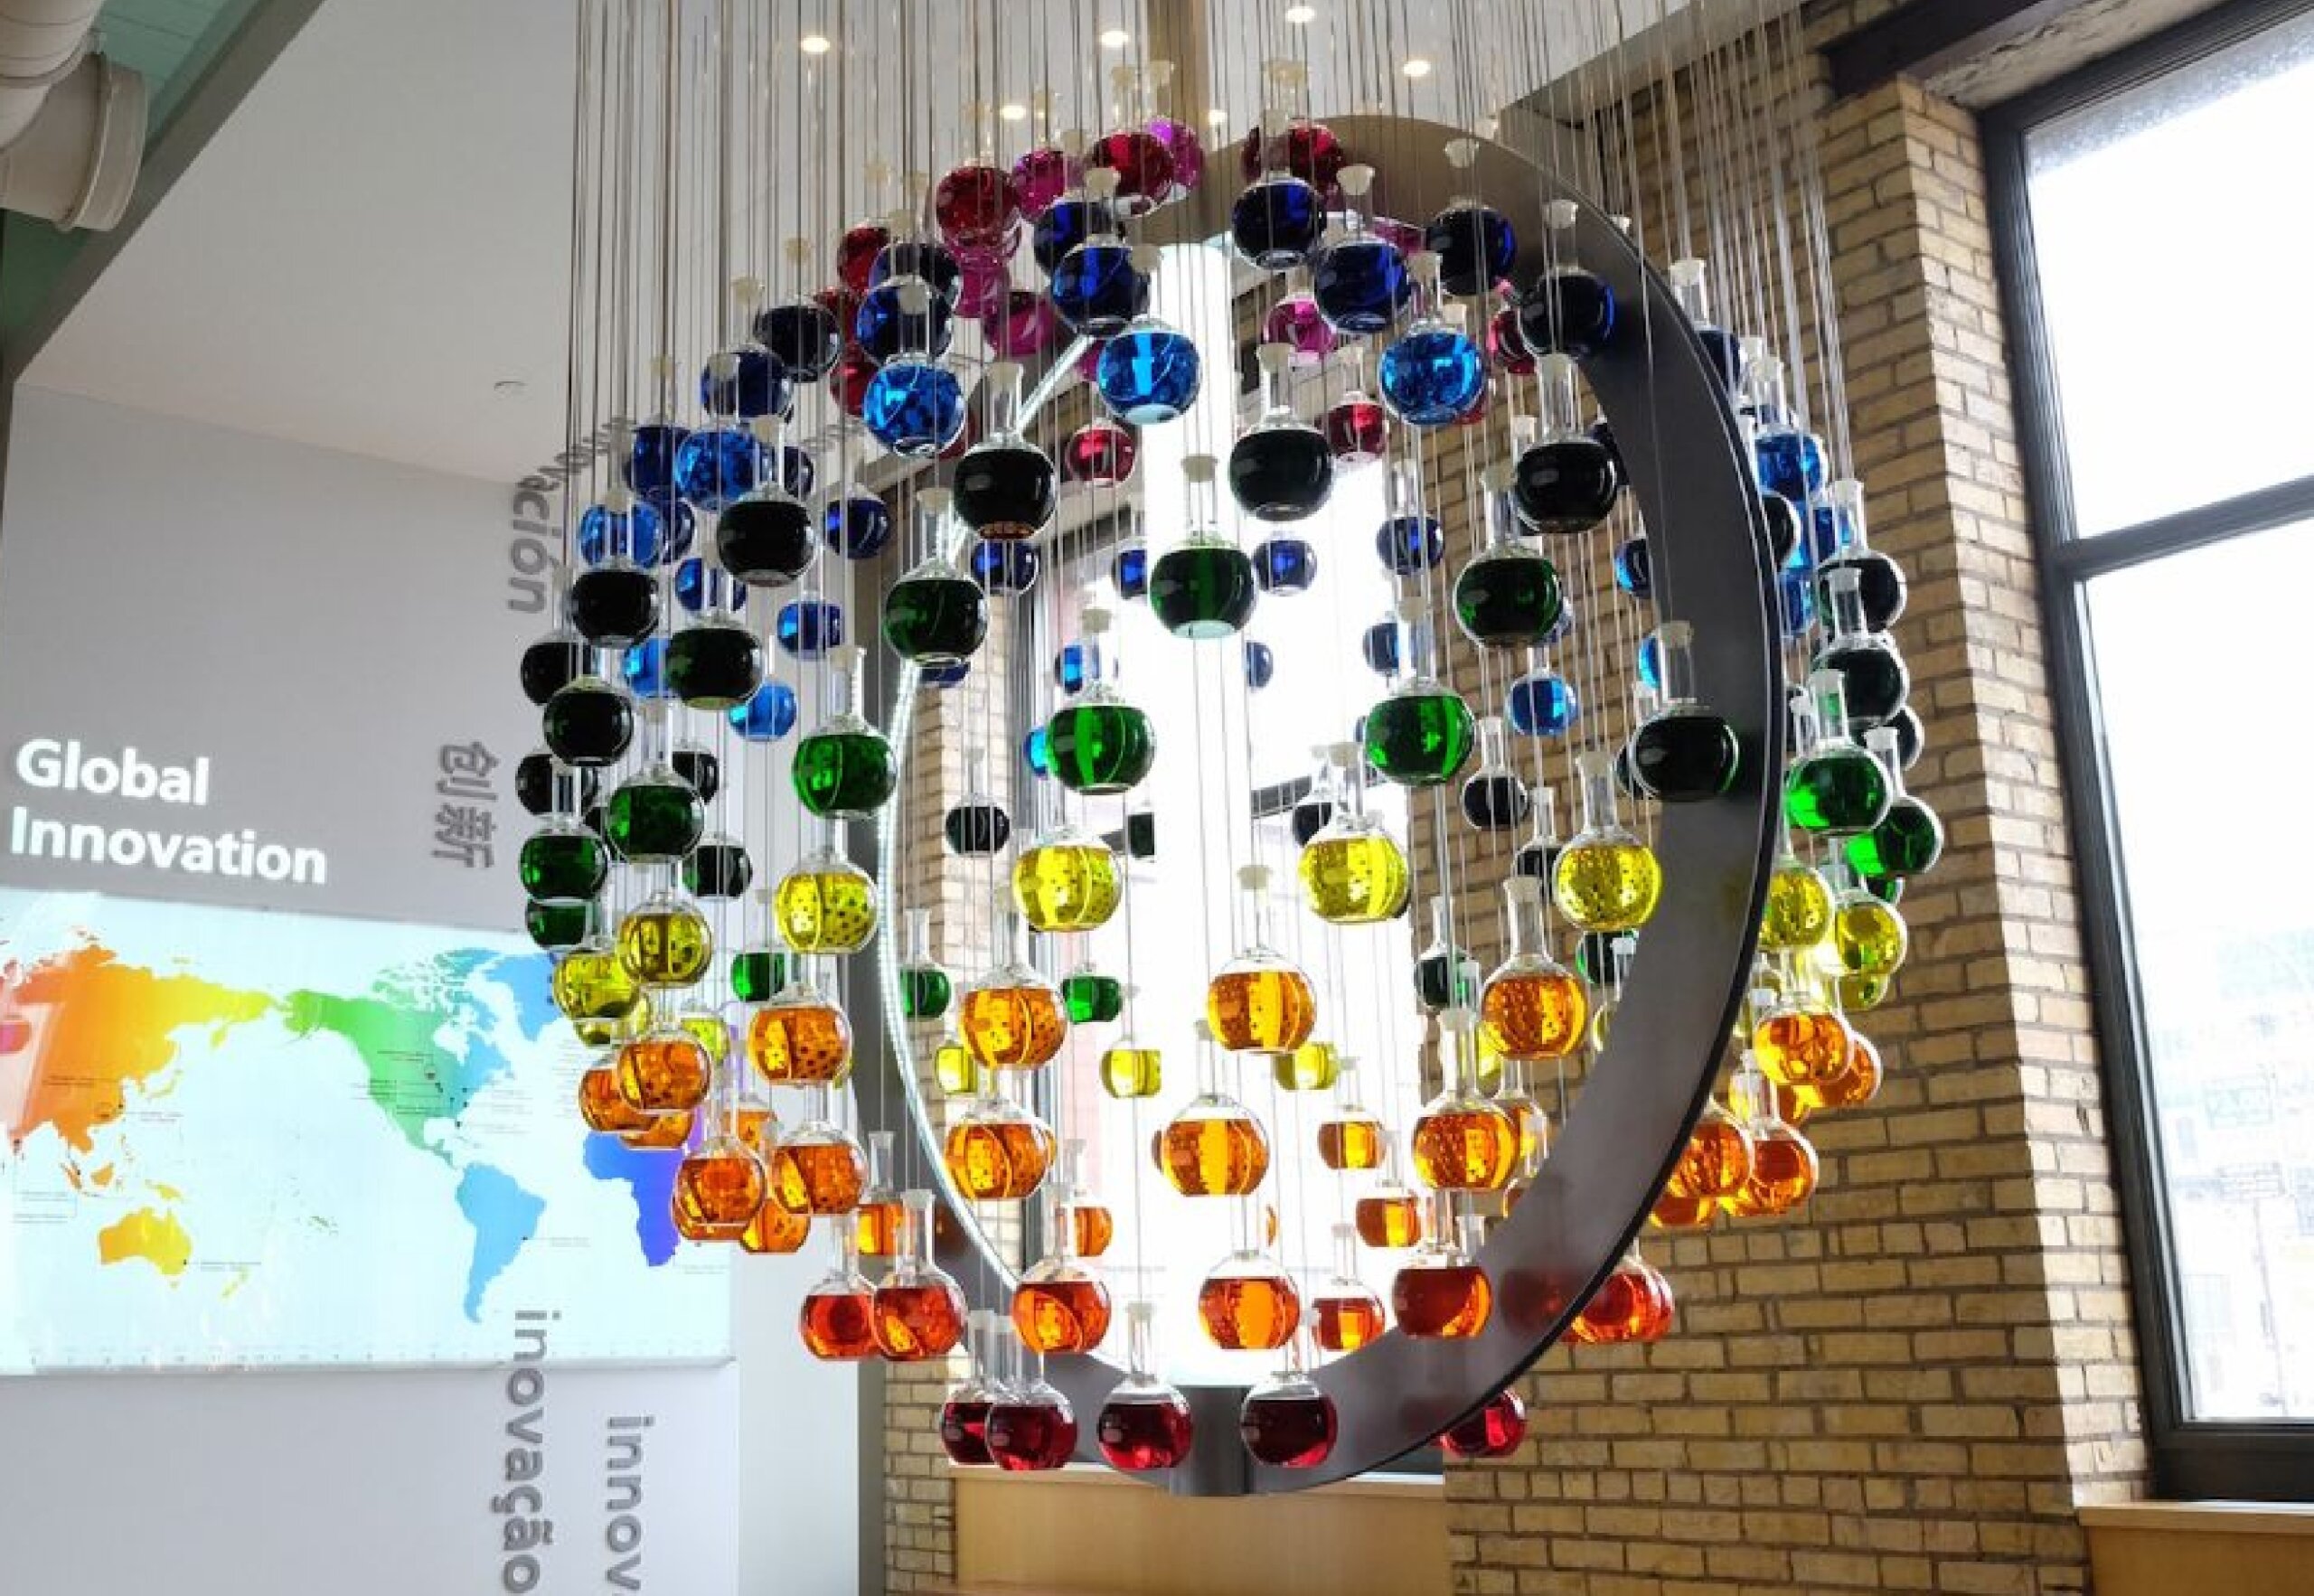 Colorful hanging ball display in front of a map